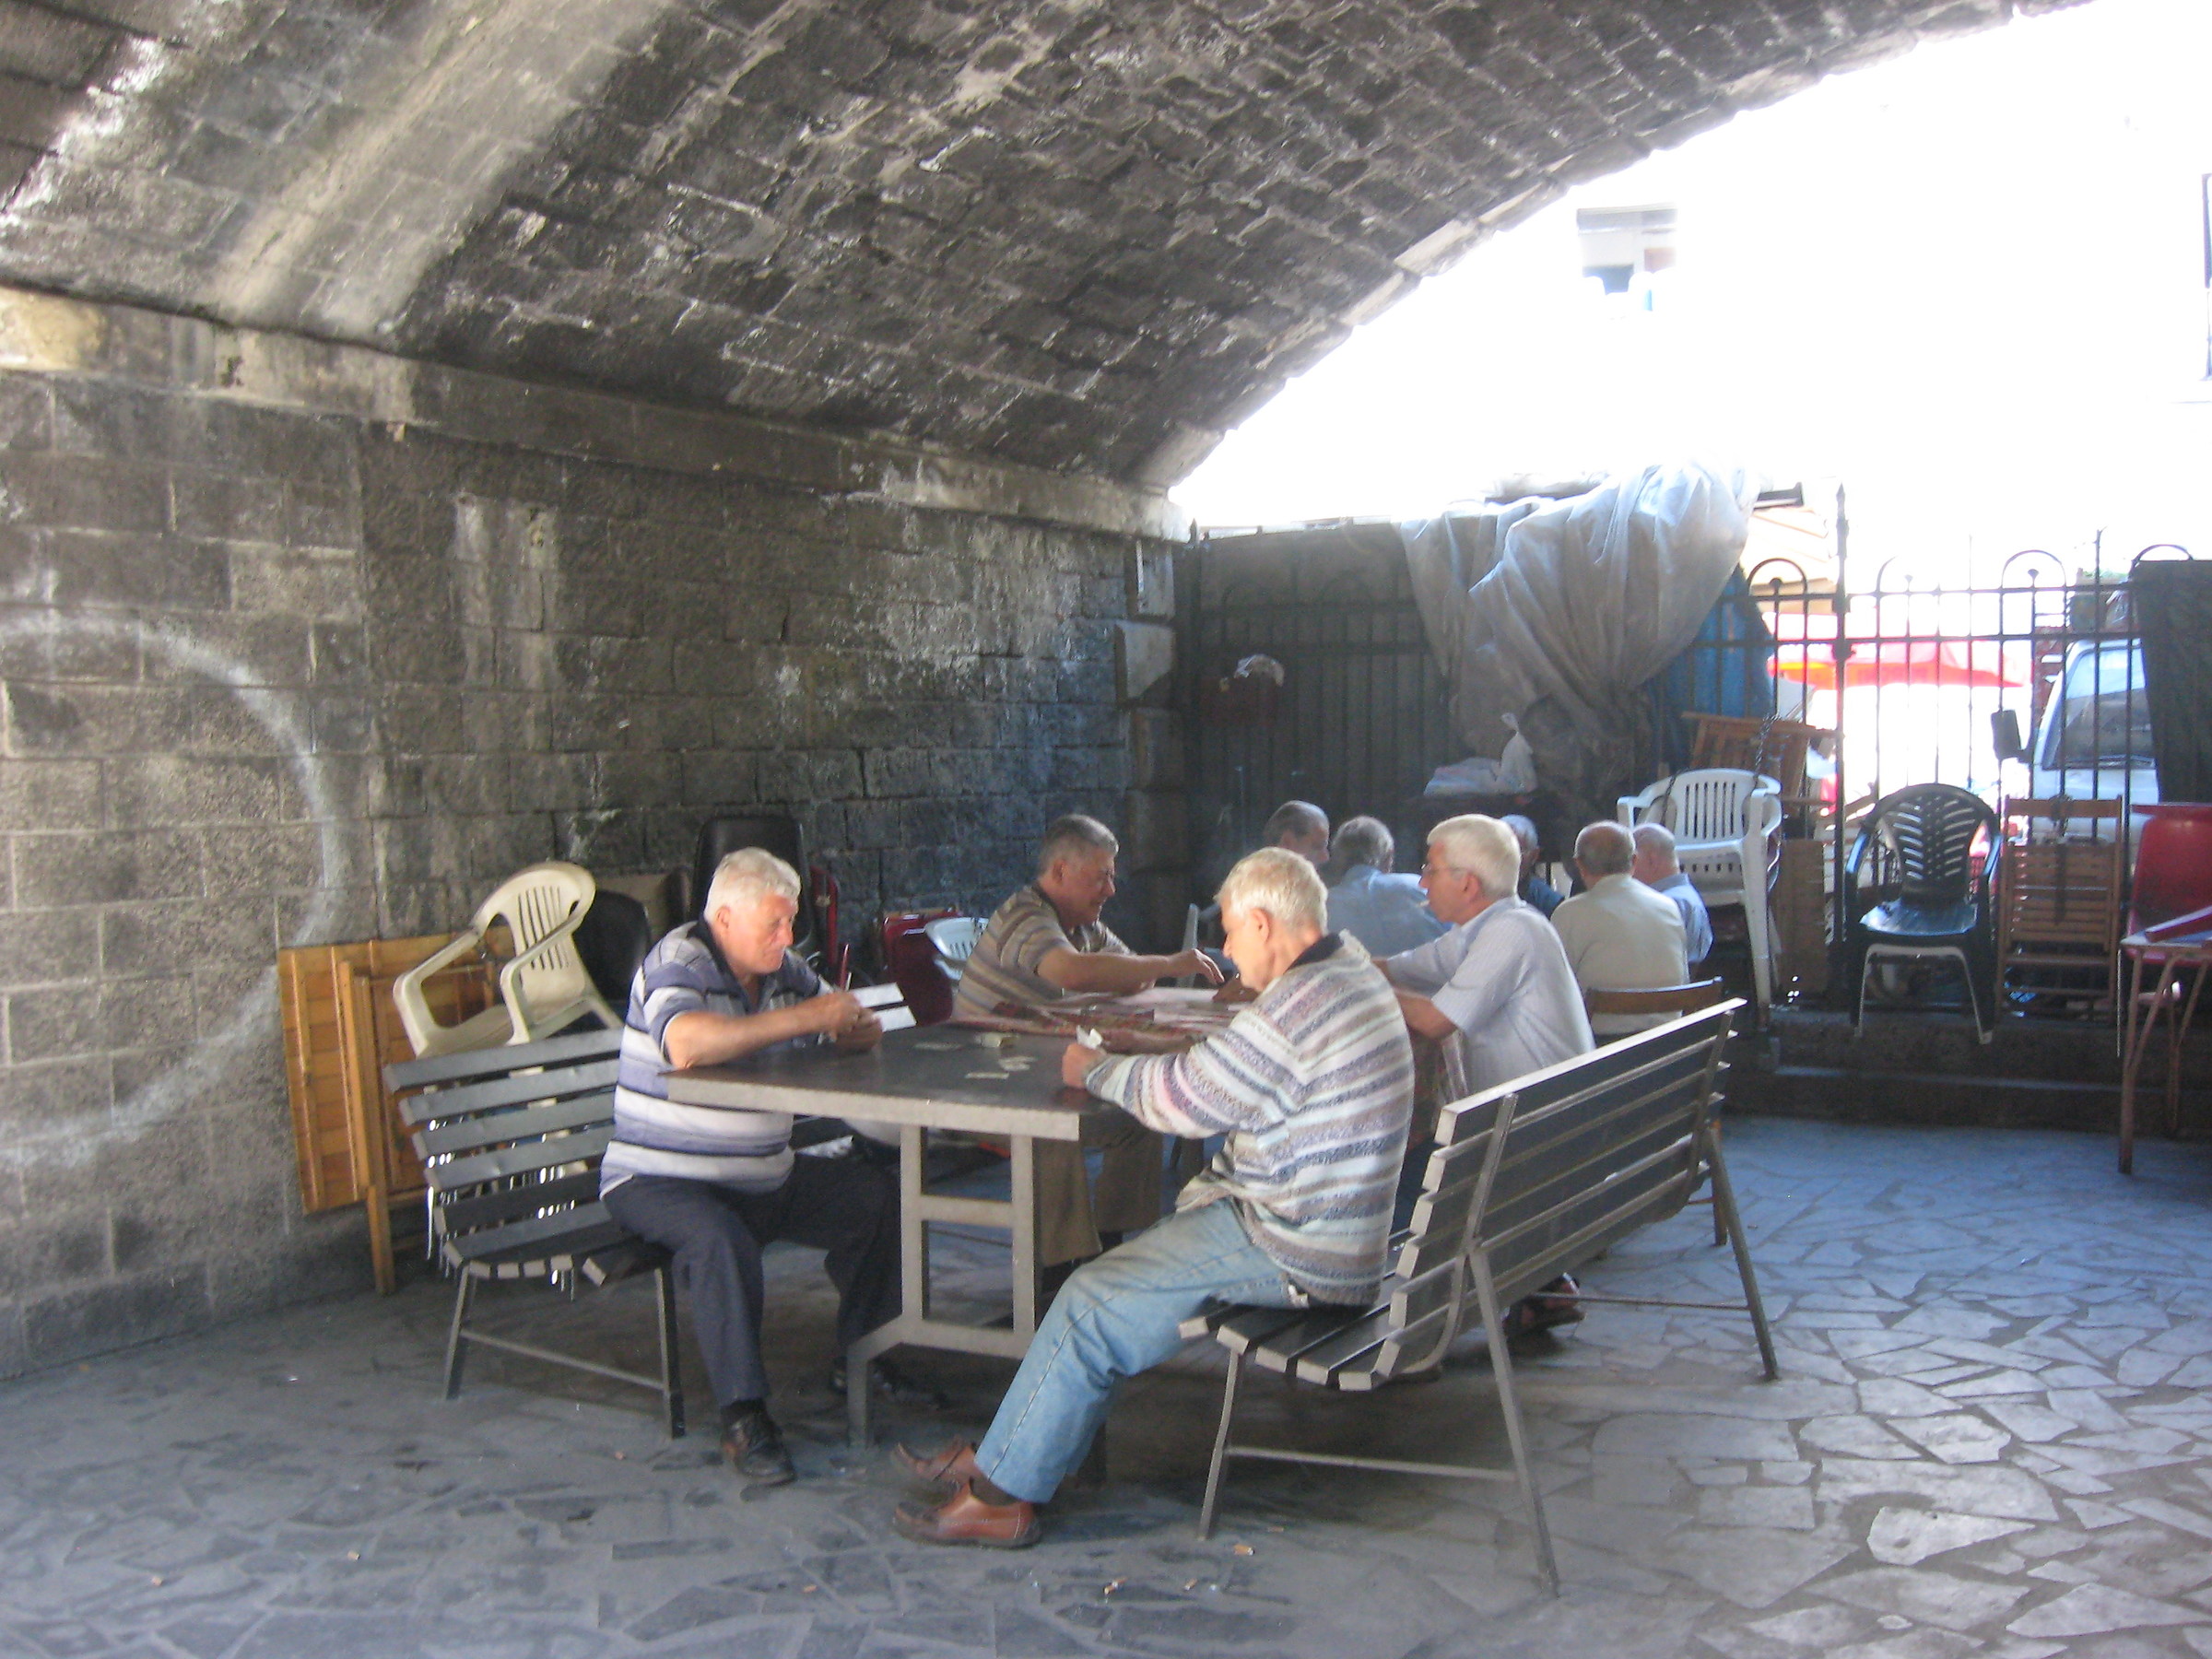 Retired people playing cards (Catania)...